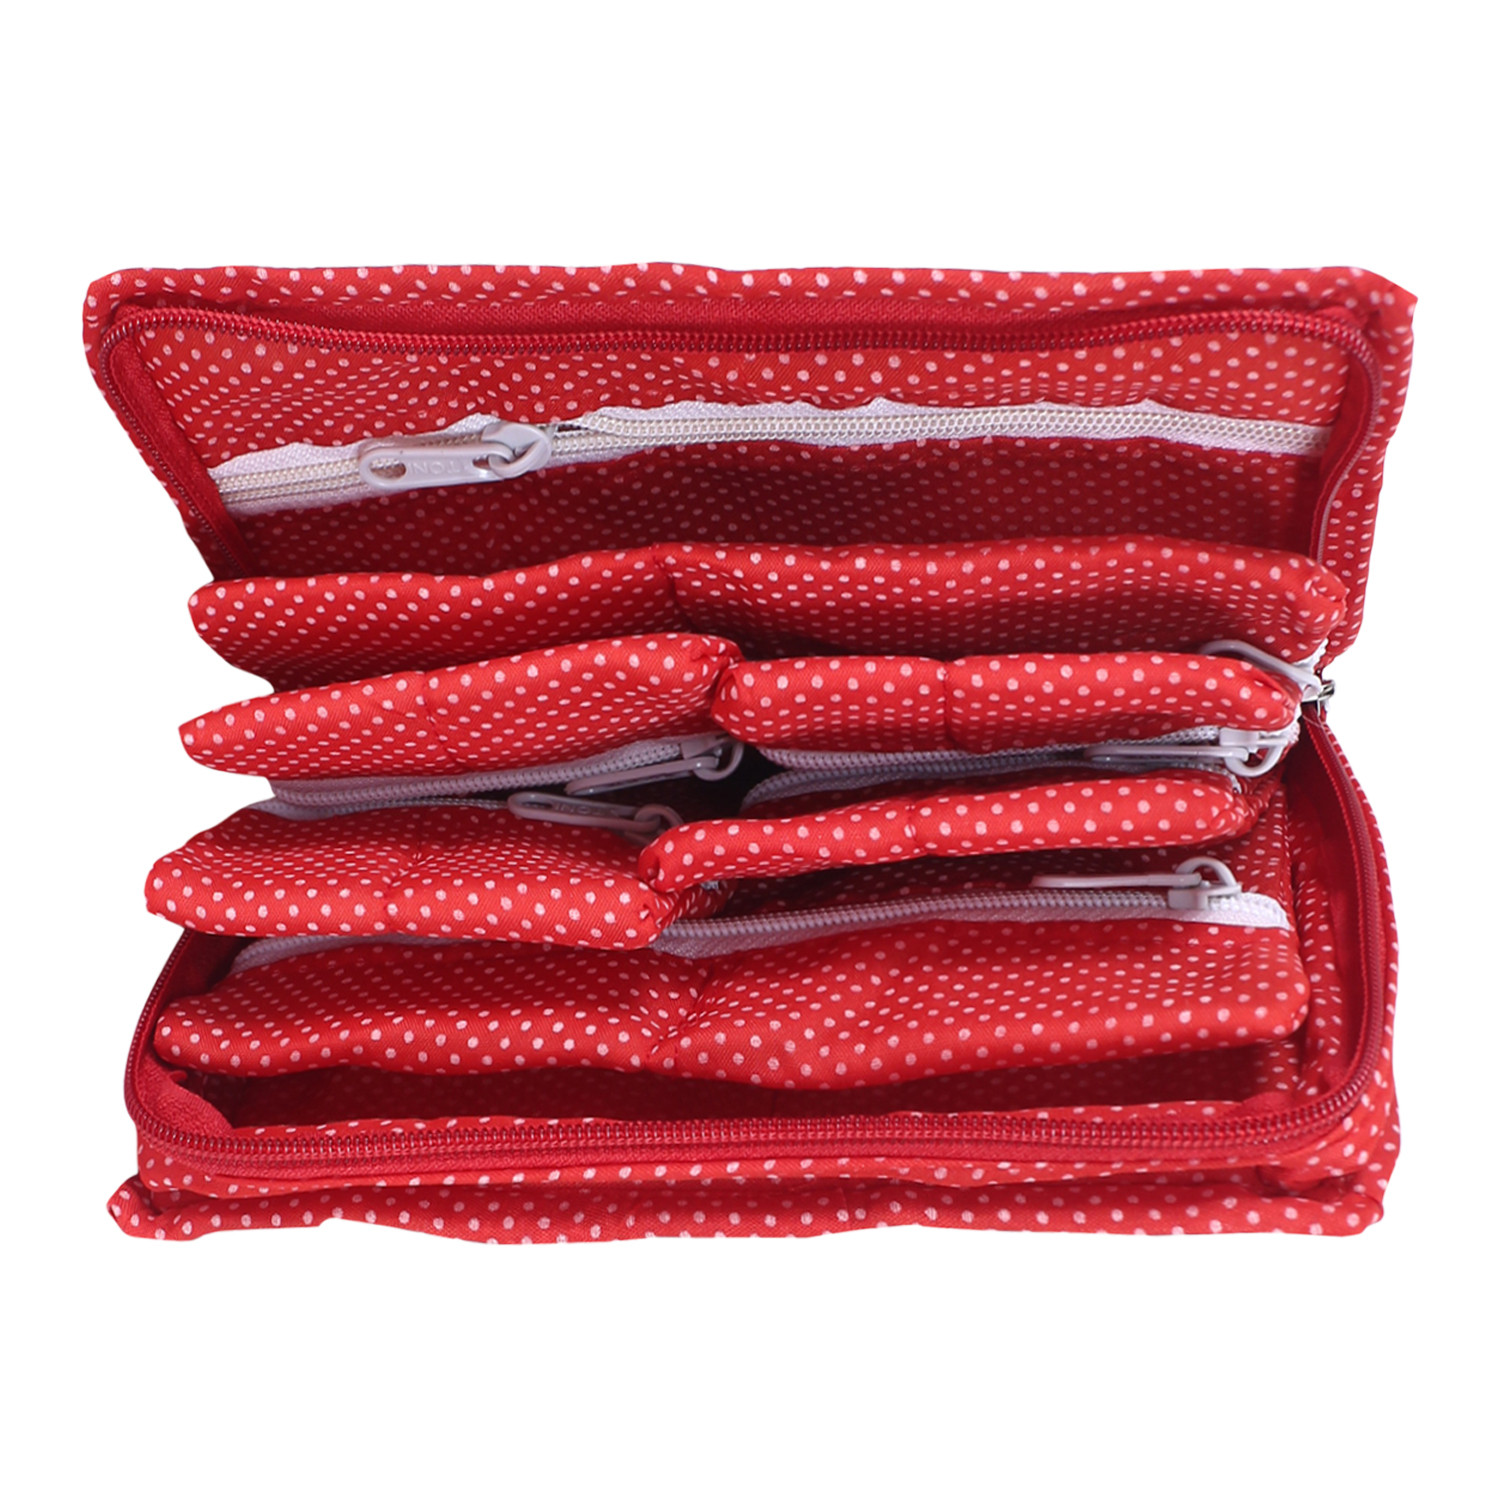 Kuber Industries Jewellery Kit | Cotton Bow Dot Print Travel Kit | 7 Pouch Jewellery Storage Kit | Makeup Organizer for Woman | Red